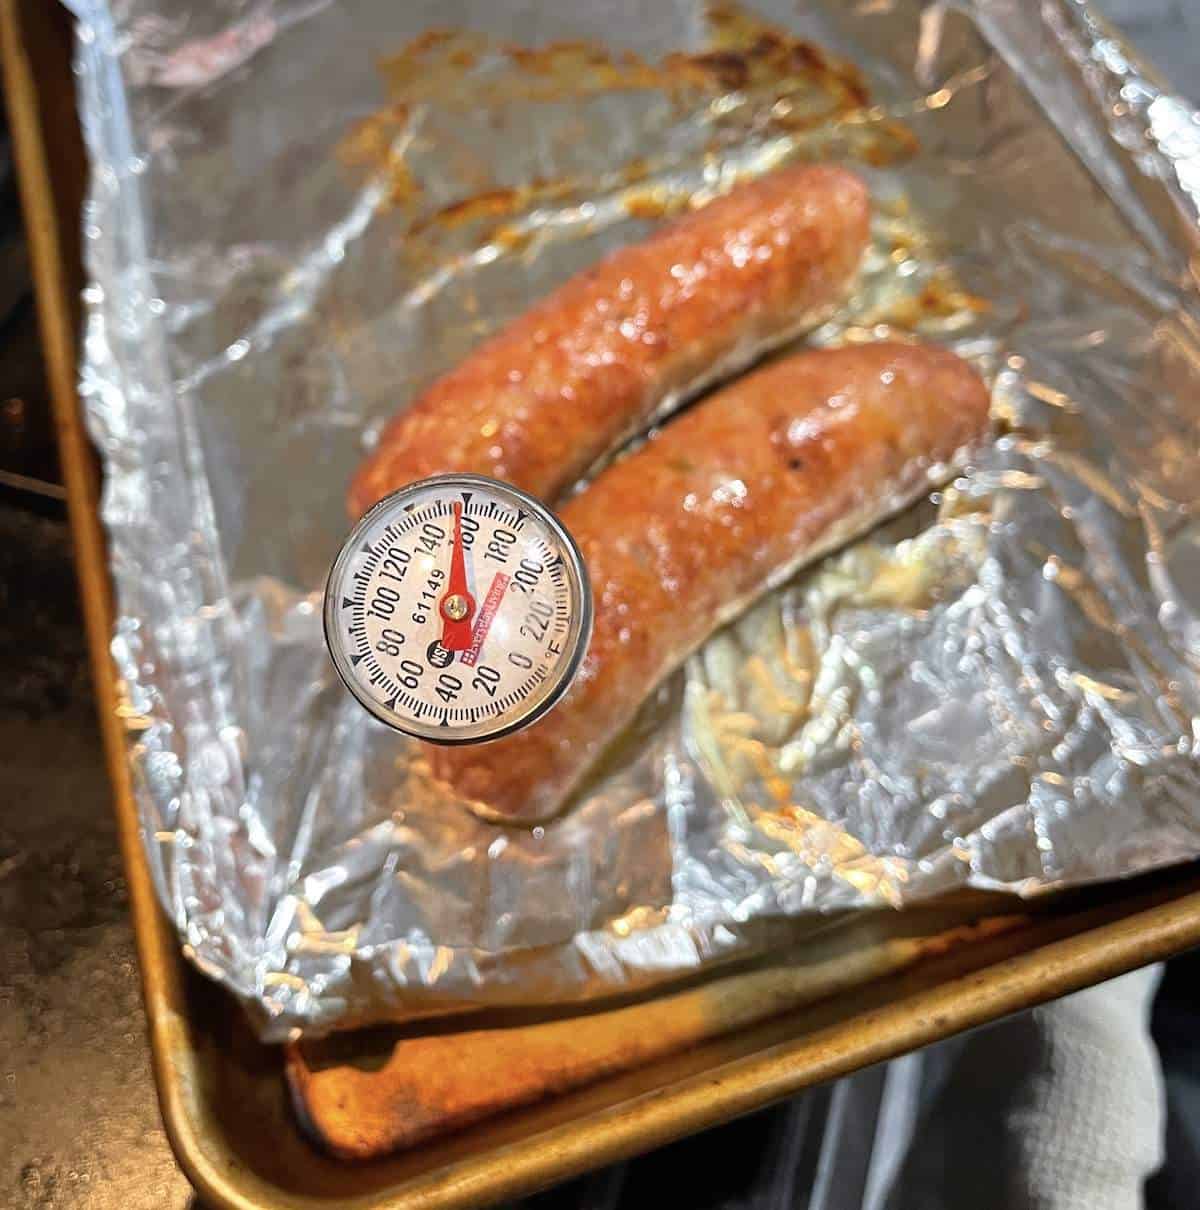 Two oven baked Italian sausages on a foil lined baking sheet with the temperature being taken.